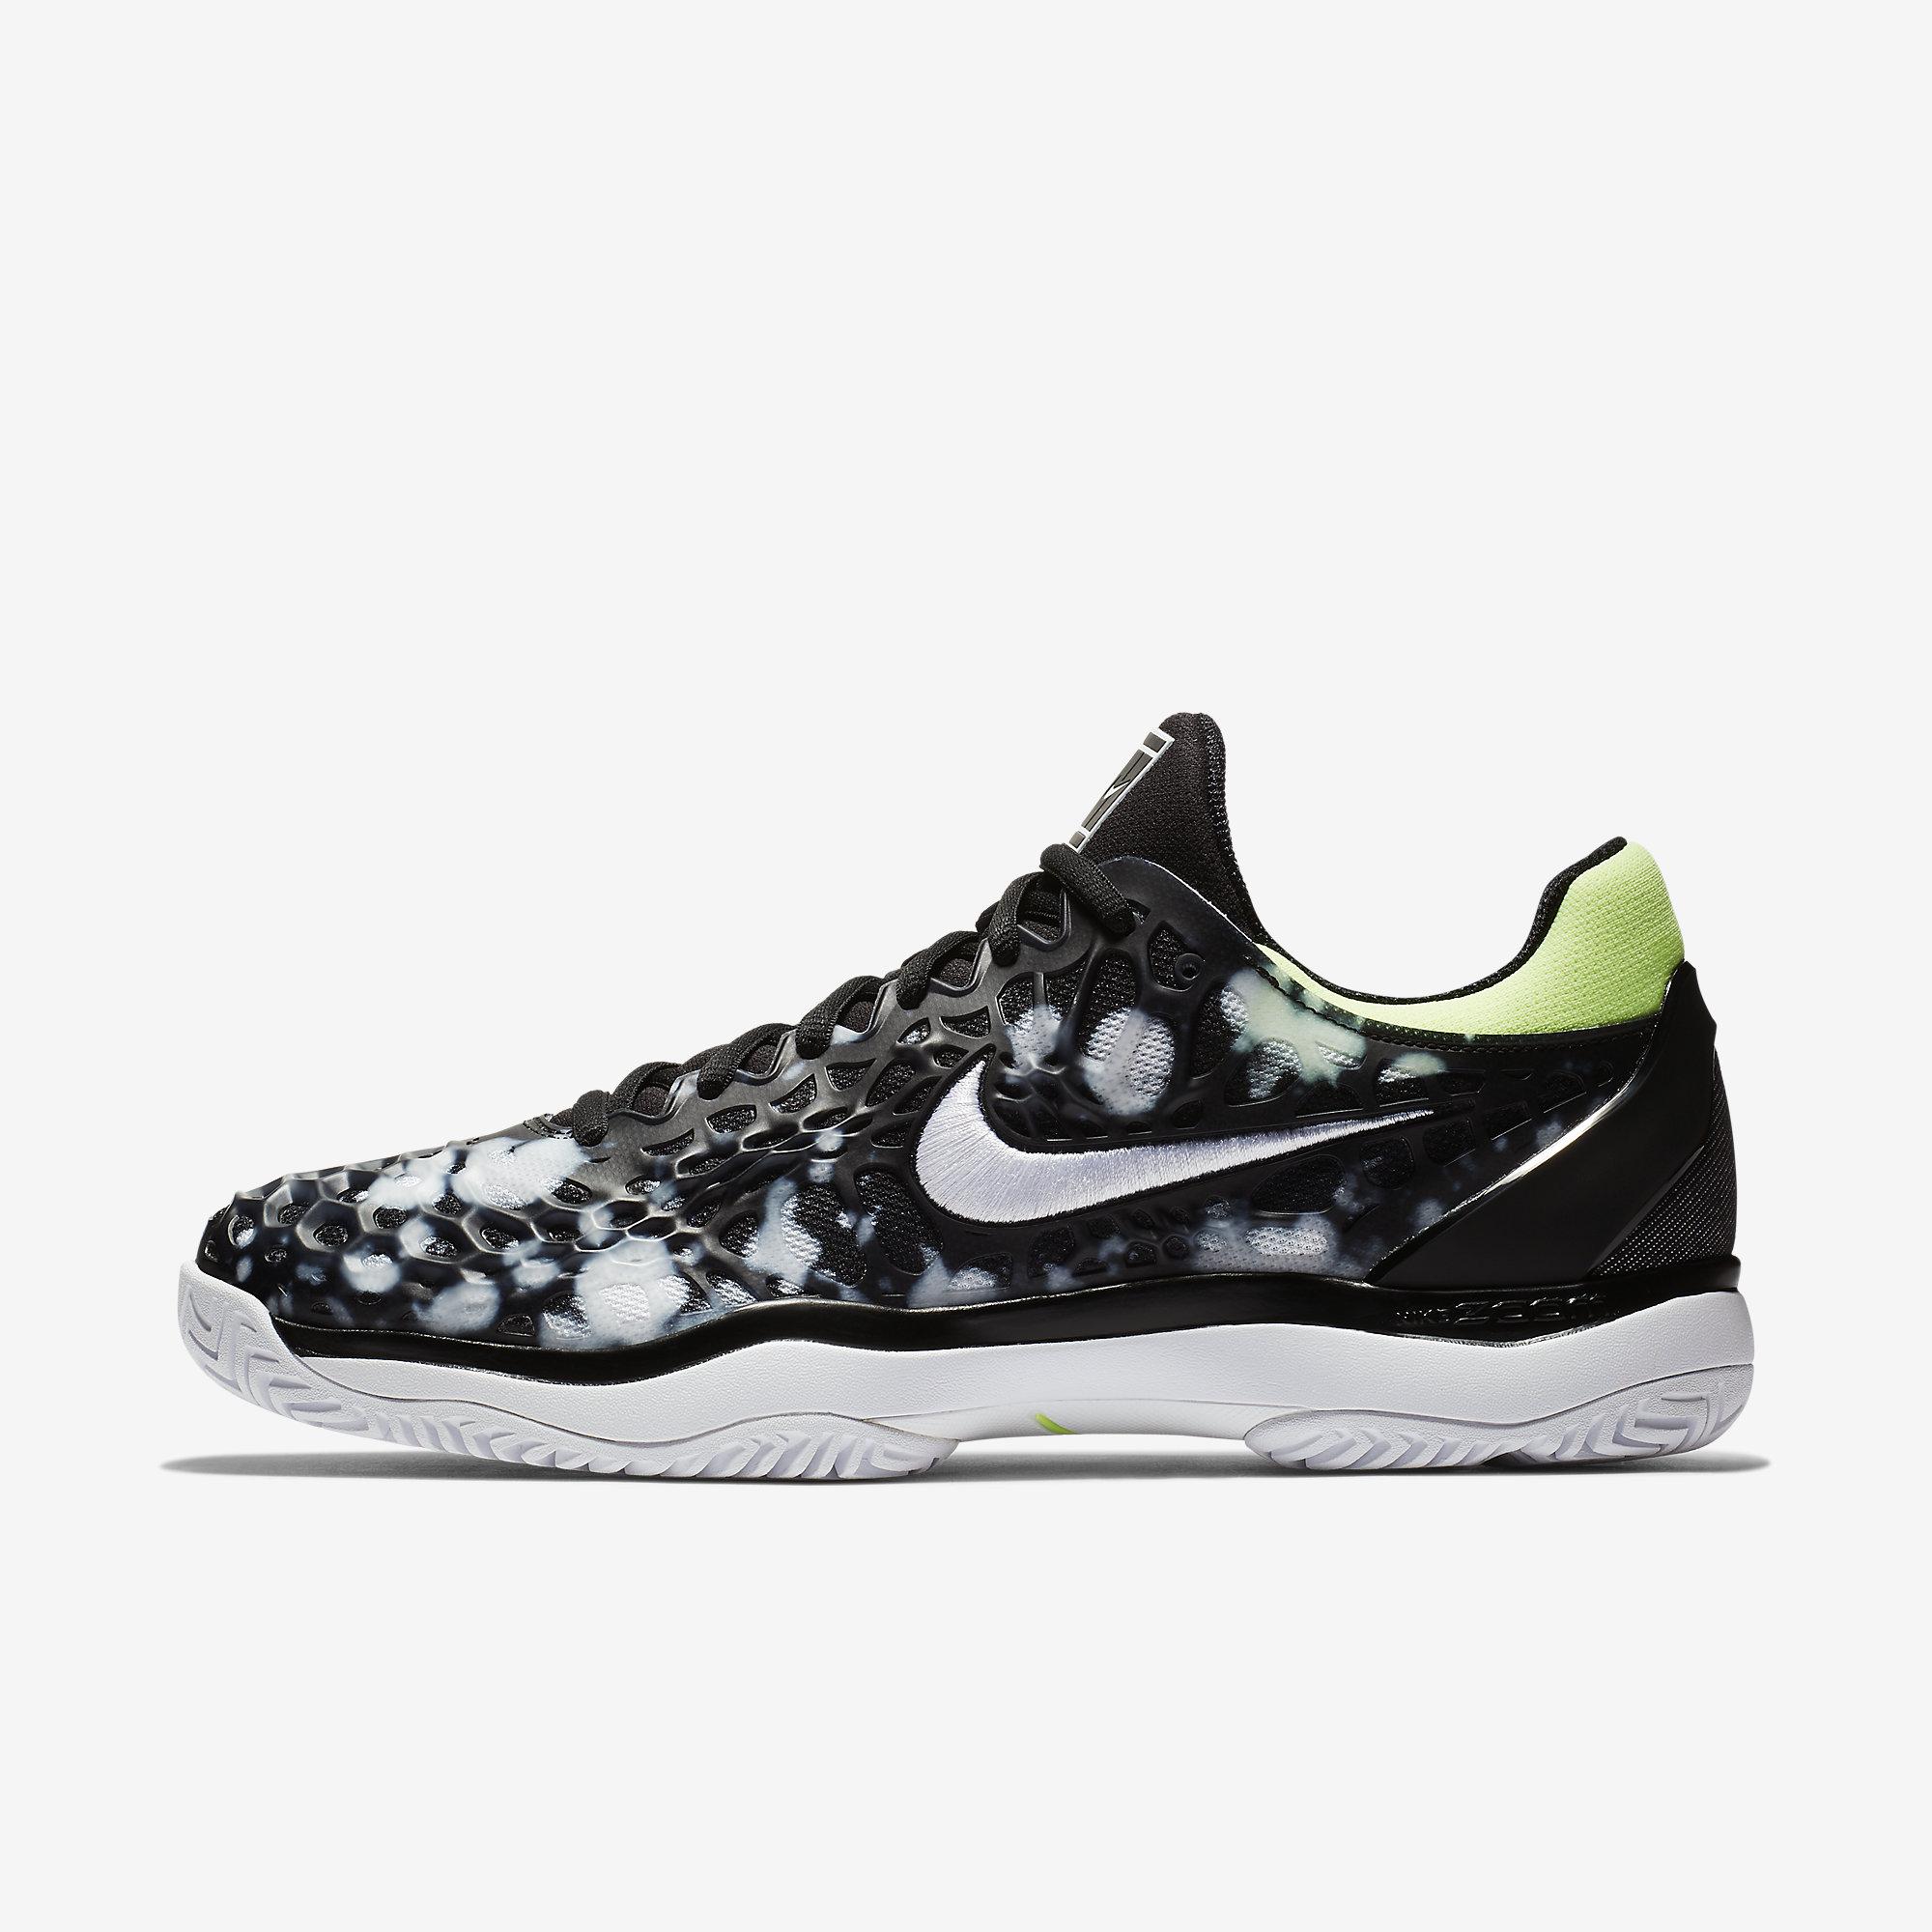 nike zoom cage 3 tennis